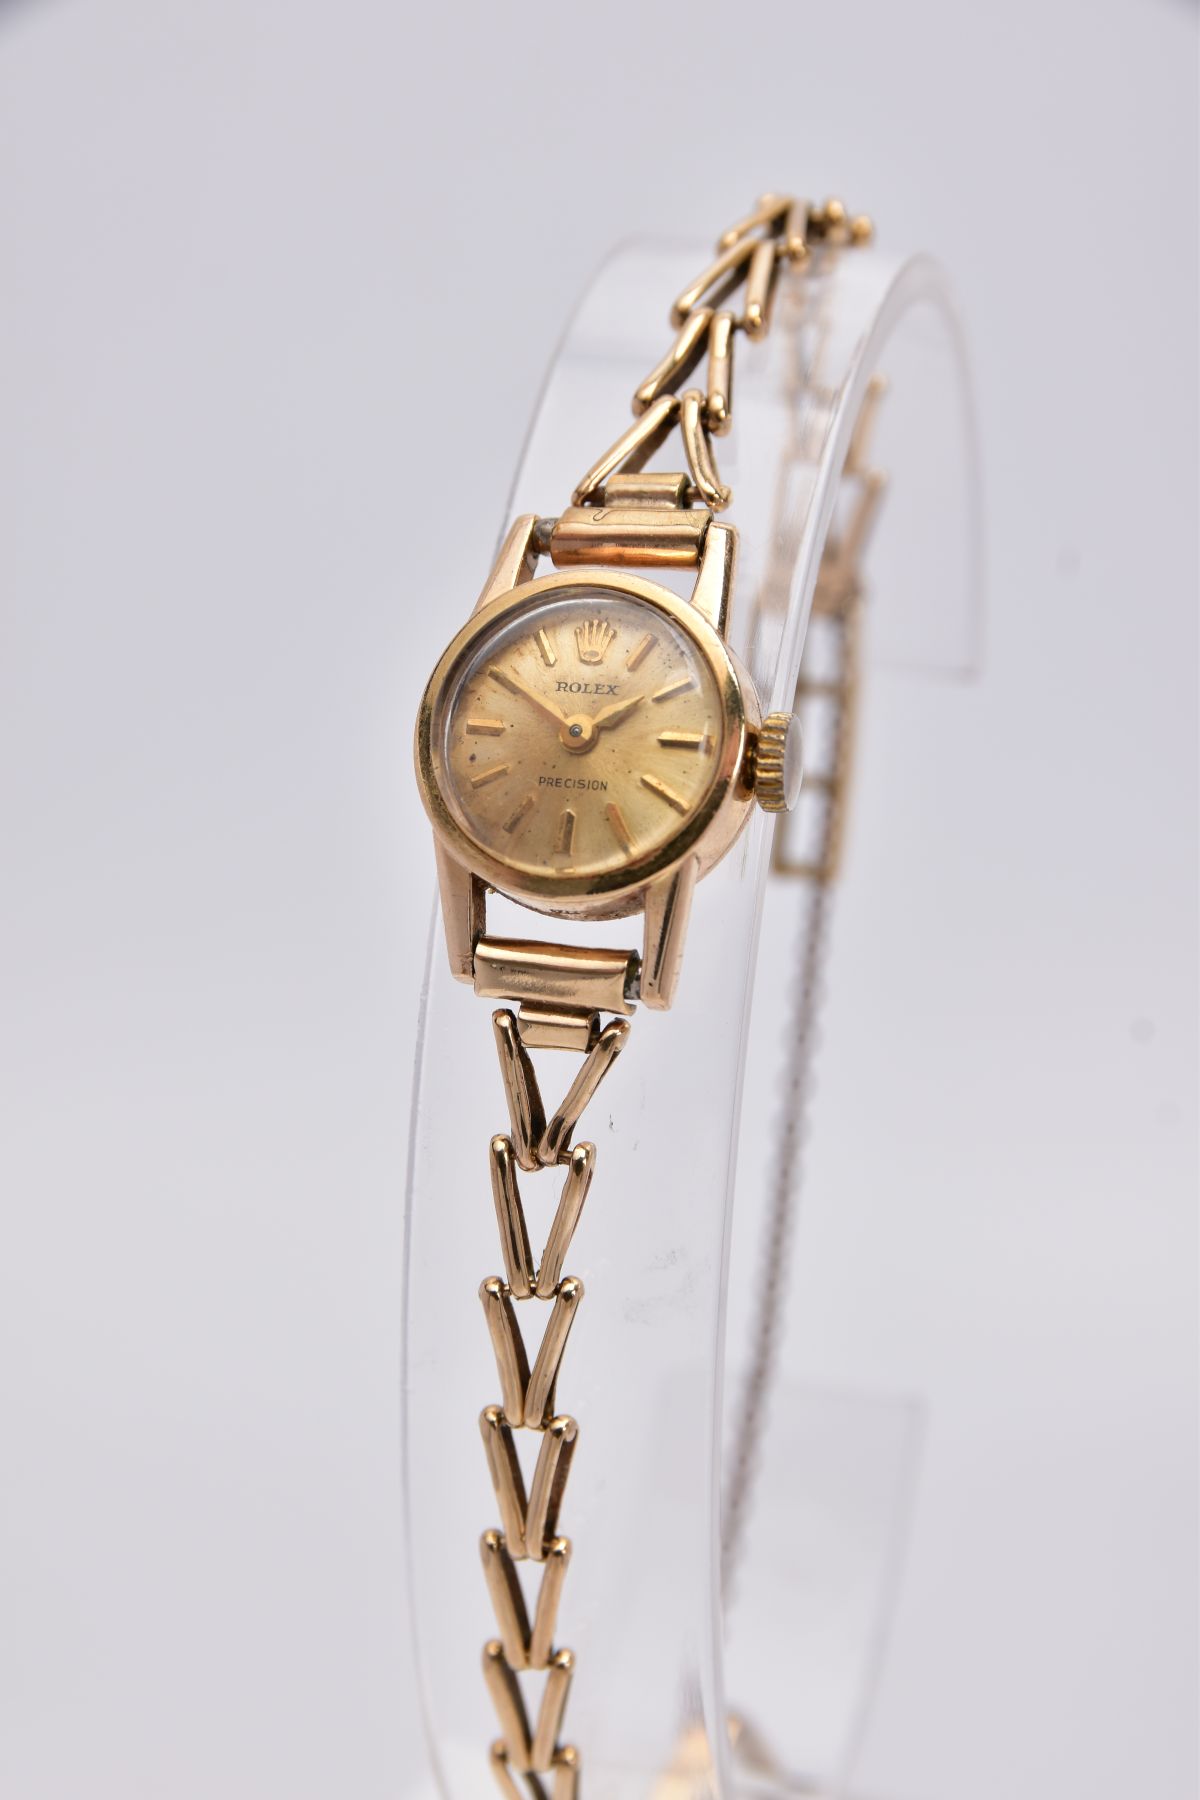 A LADIES 9CT GOLD ROLEX PRECISION WRISTWATCH, round case measuring approximately 16mm in diameter, - Image 3 of 6